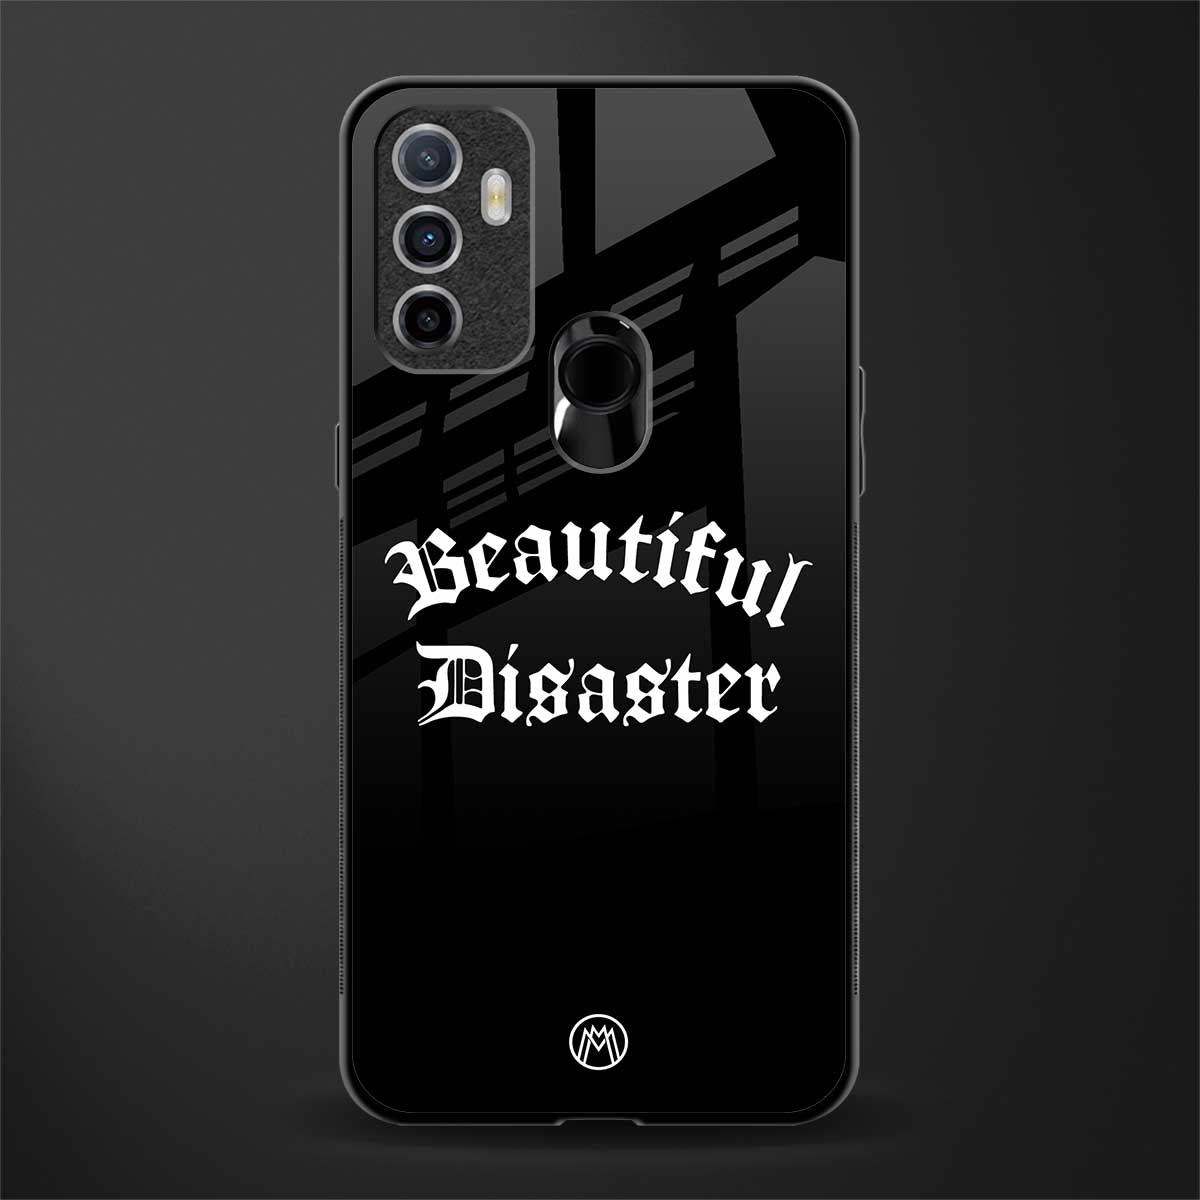 beautiful disaster glass case for oppo a53 image